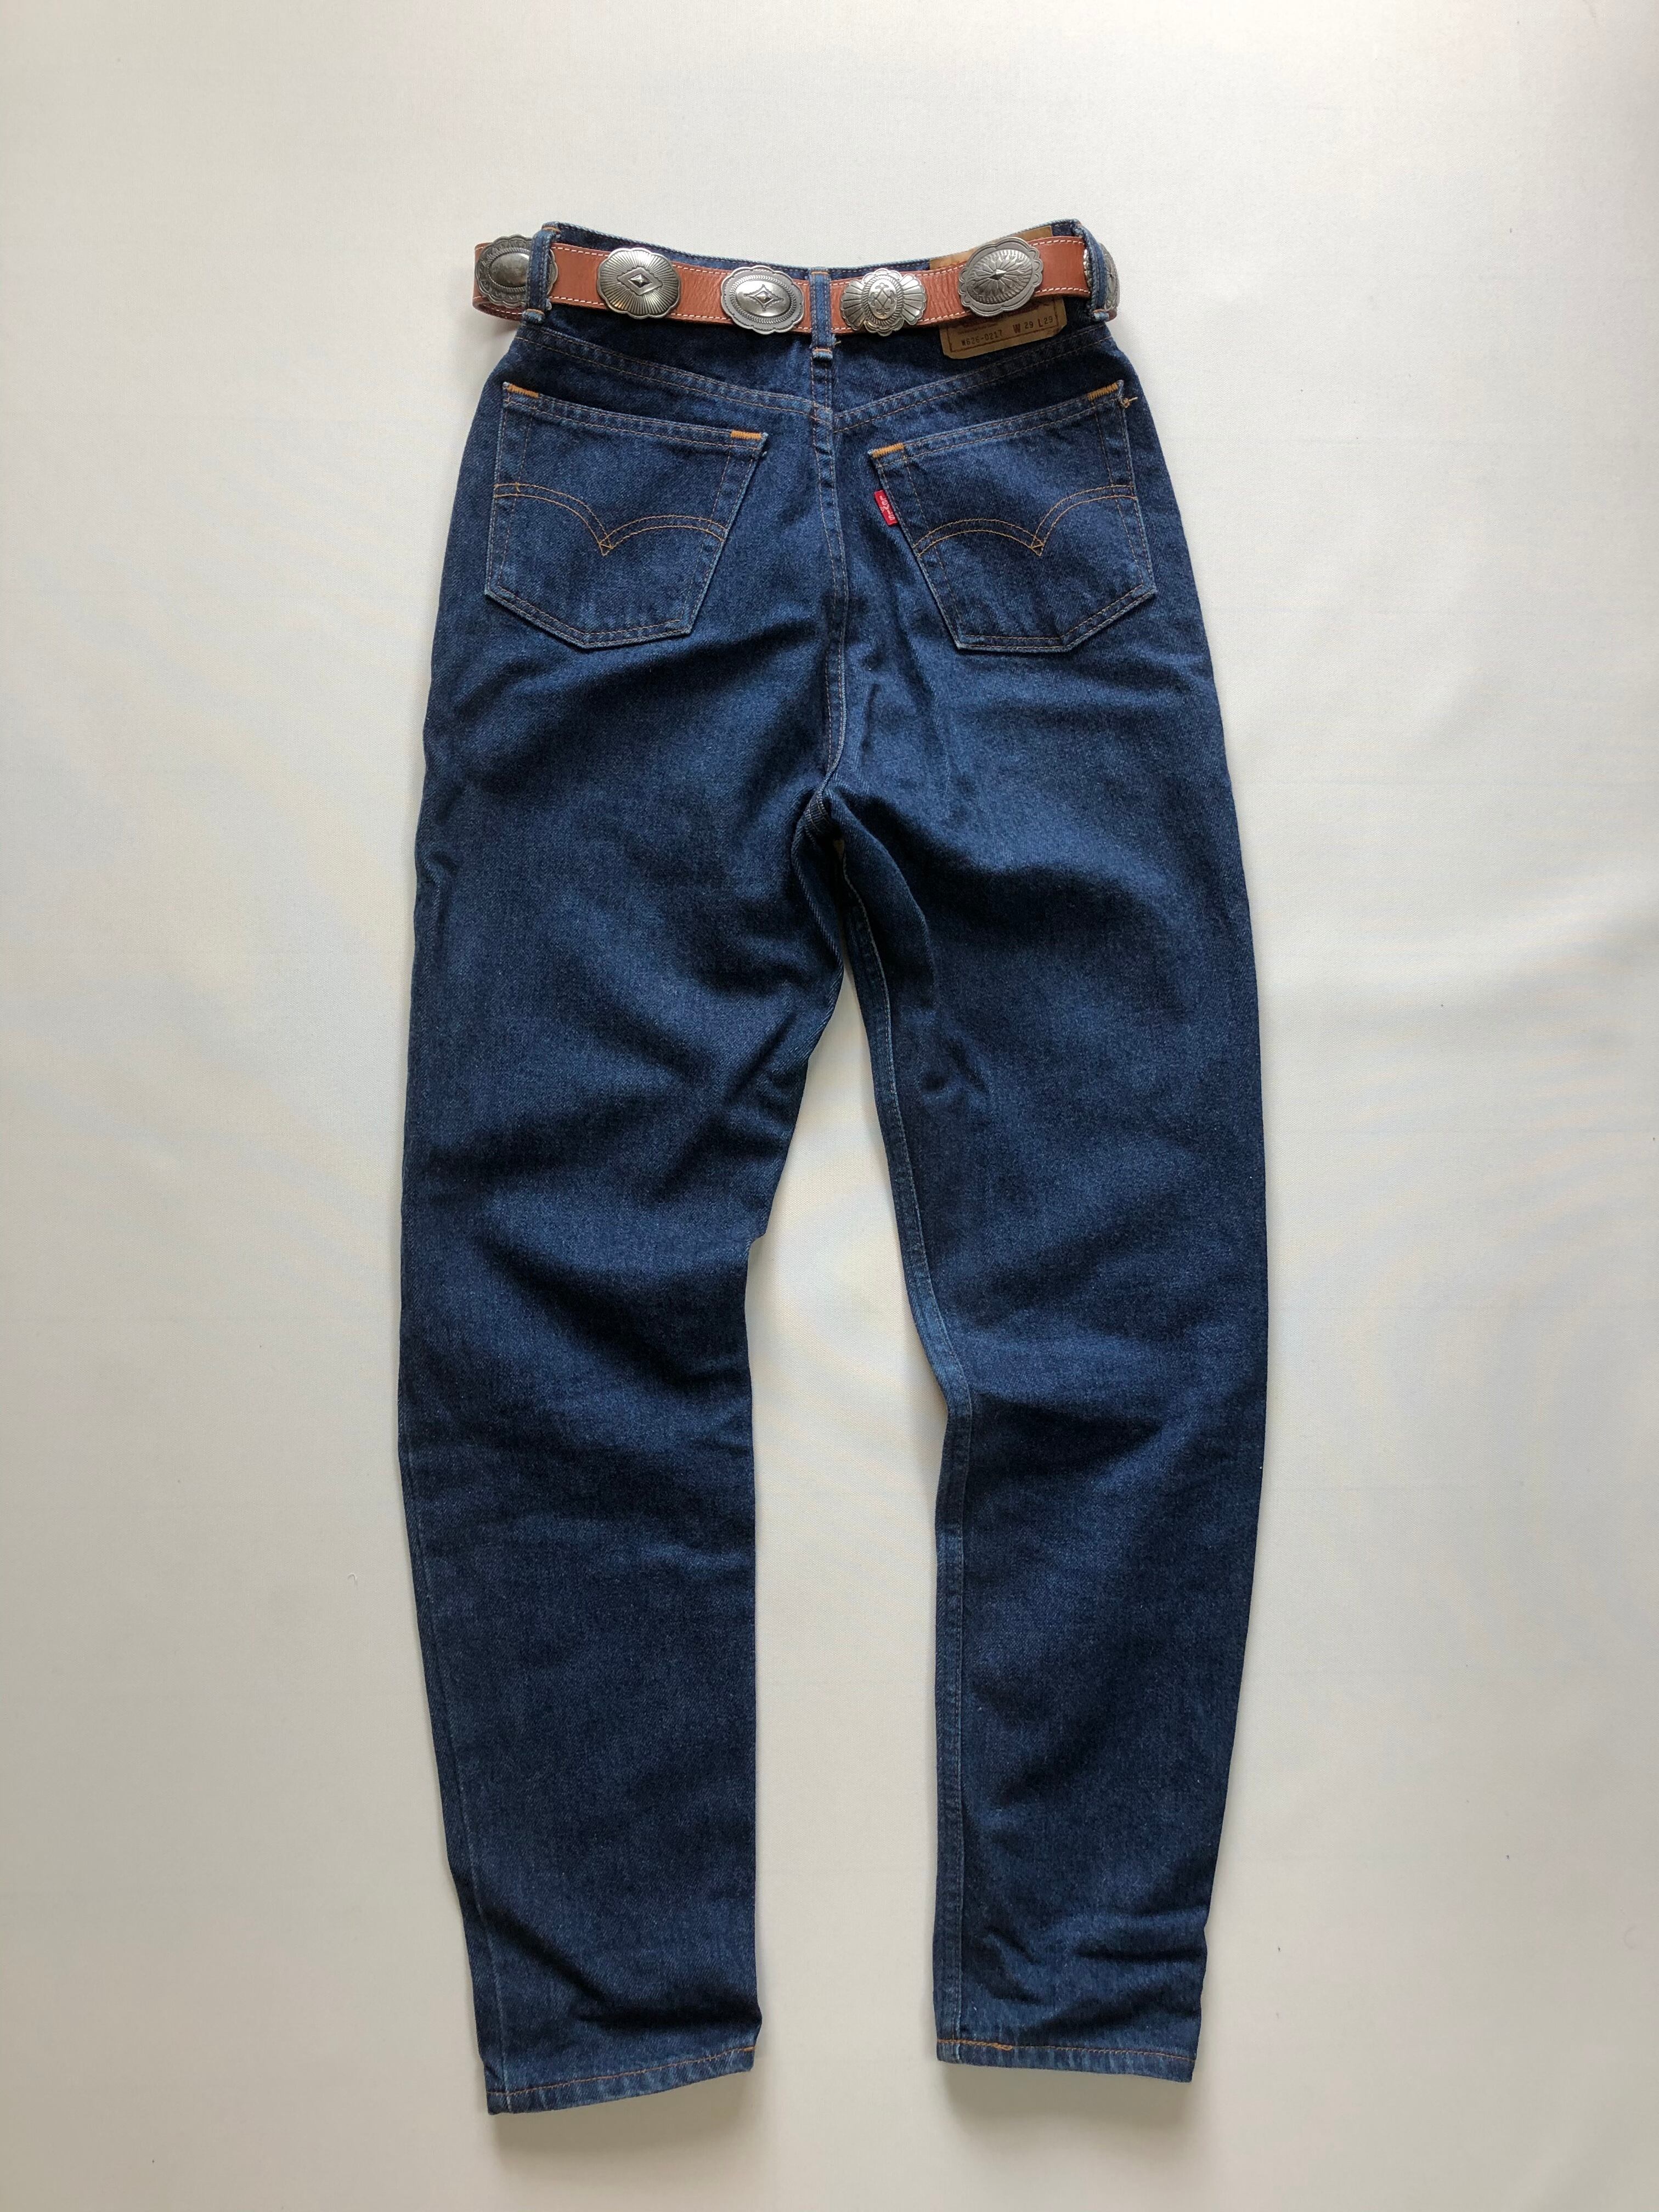 90's LEVI'S W626 リーバイス スリムデニム 215 | ＳＥＣＯＮＤ HAND RED